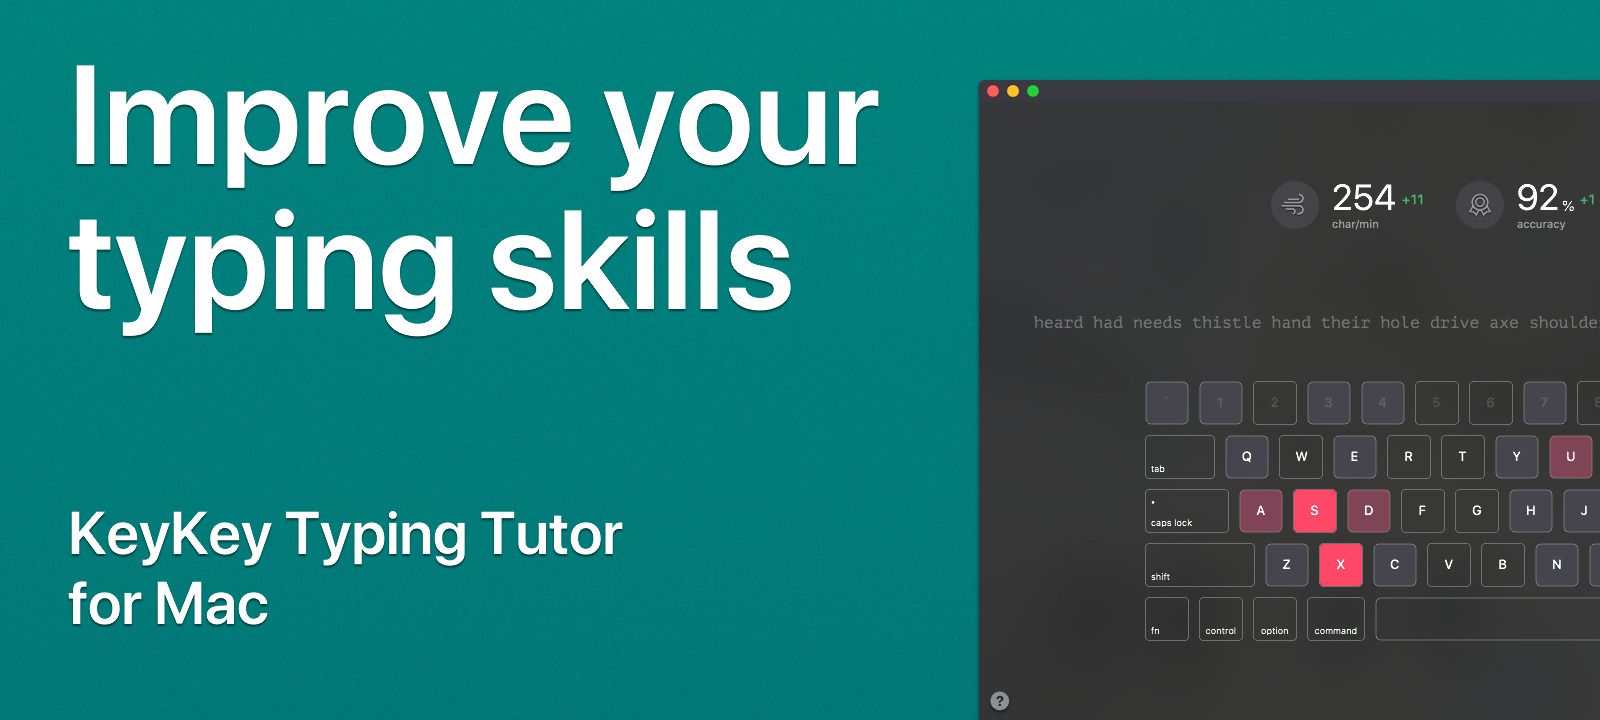 Keykey 2 2 – typing tutor lessons for beginners